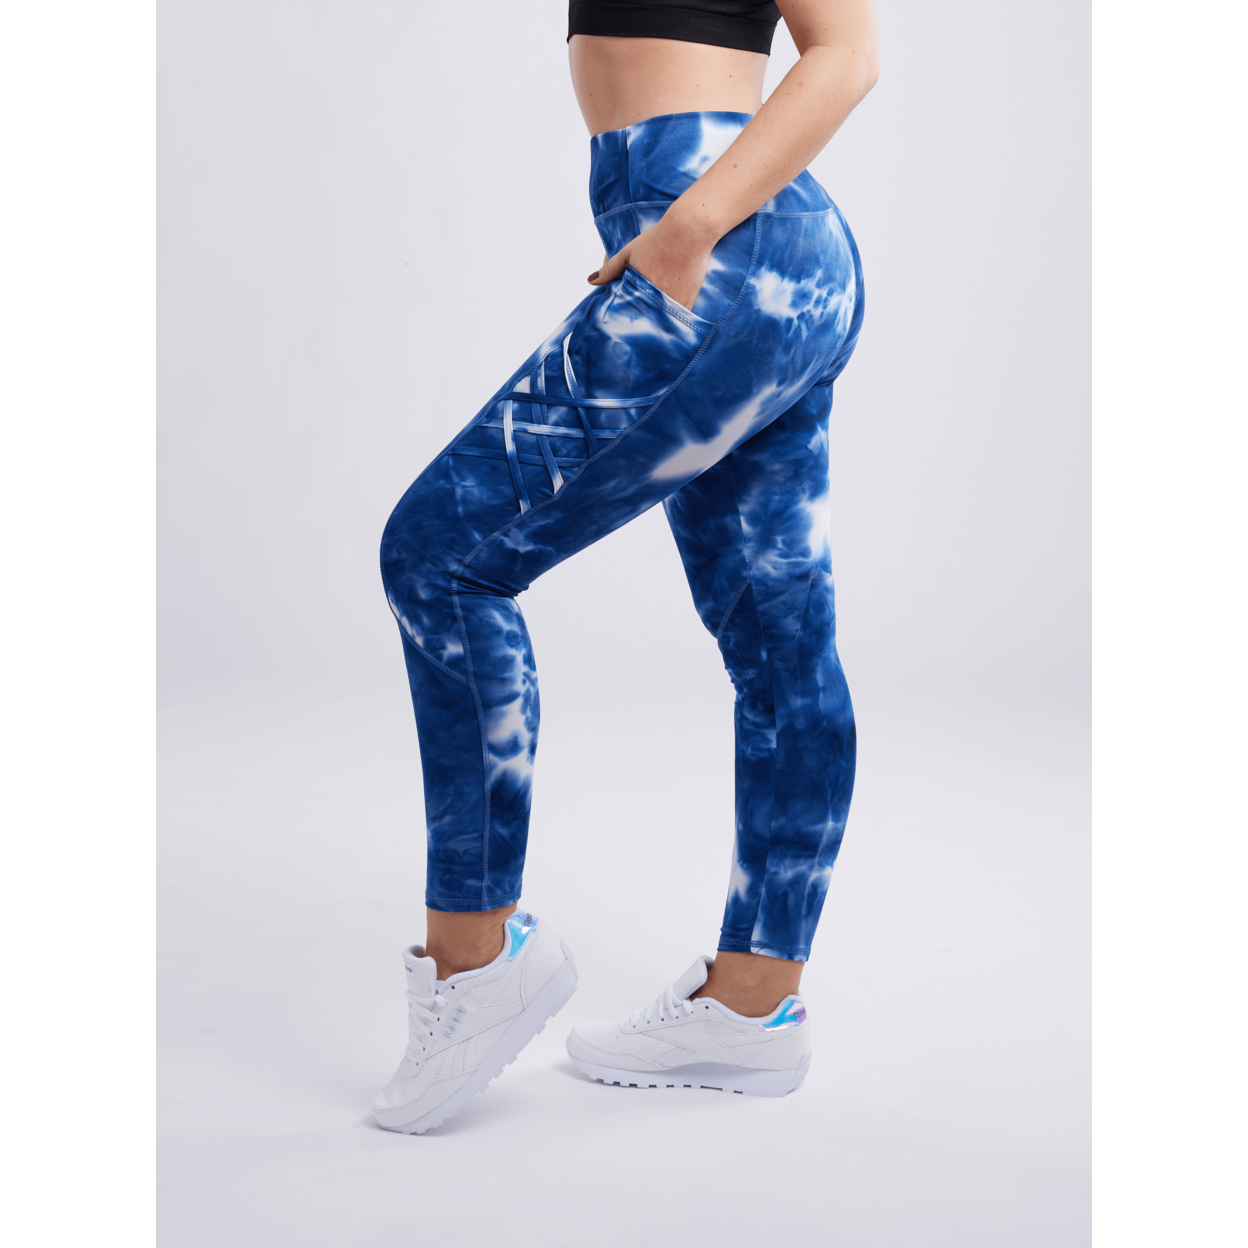 High-Waisted Criss-Cross Training Leggings With Hip Pockets - White Blue, Small / Medium